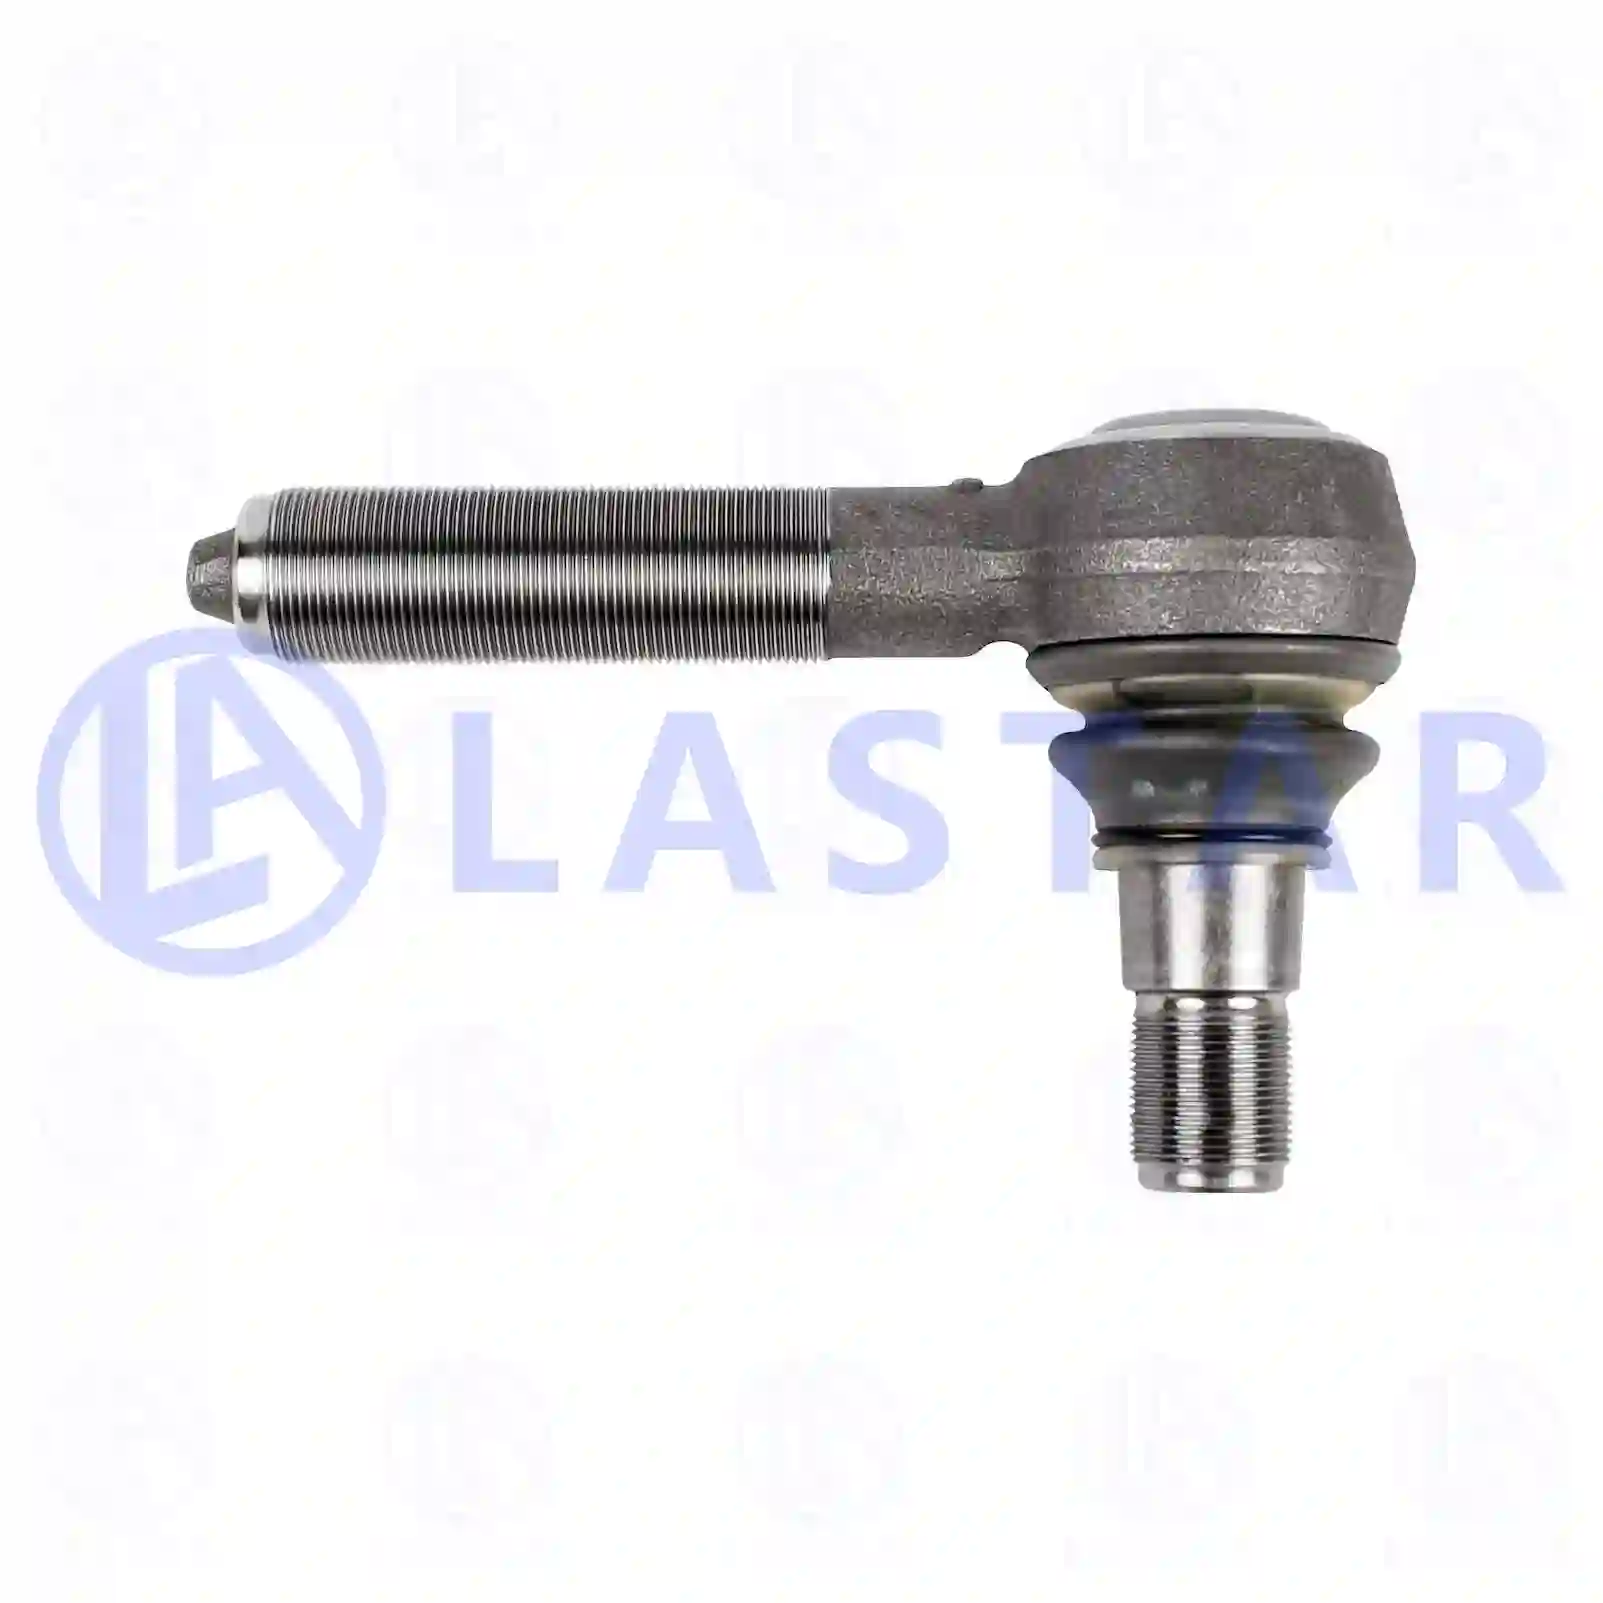 Ball joint, right hand thread, 77705409, 0004604848, 0014600648, ||  77705409 Lastar Spare Part | Truck Spare Parts, Auotomotive Spare Parts Ball joint, right hand thread, 77705409, 0004604848, 0014600648, ||  77705409 Lastar Spare Part | Truck Spare Parts, Auotomotive Spare Parts